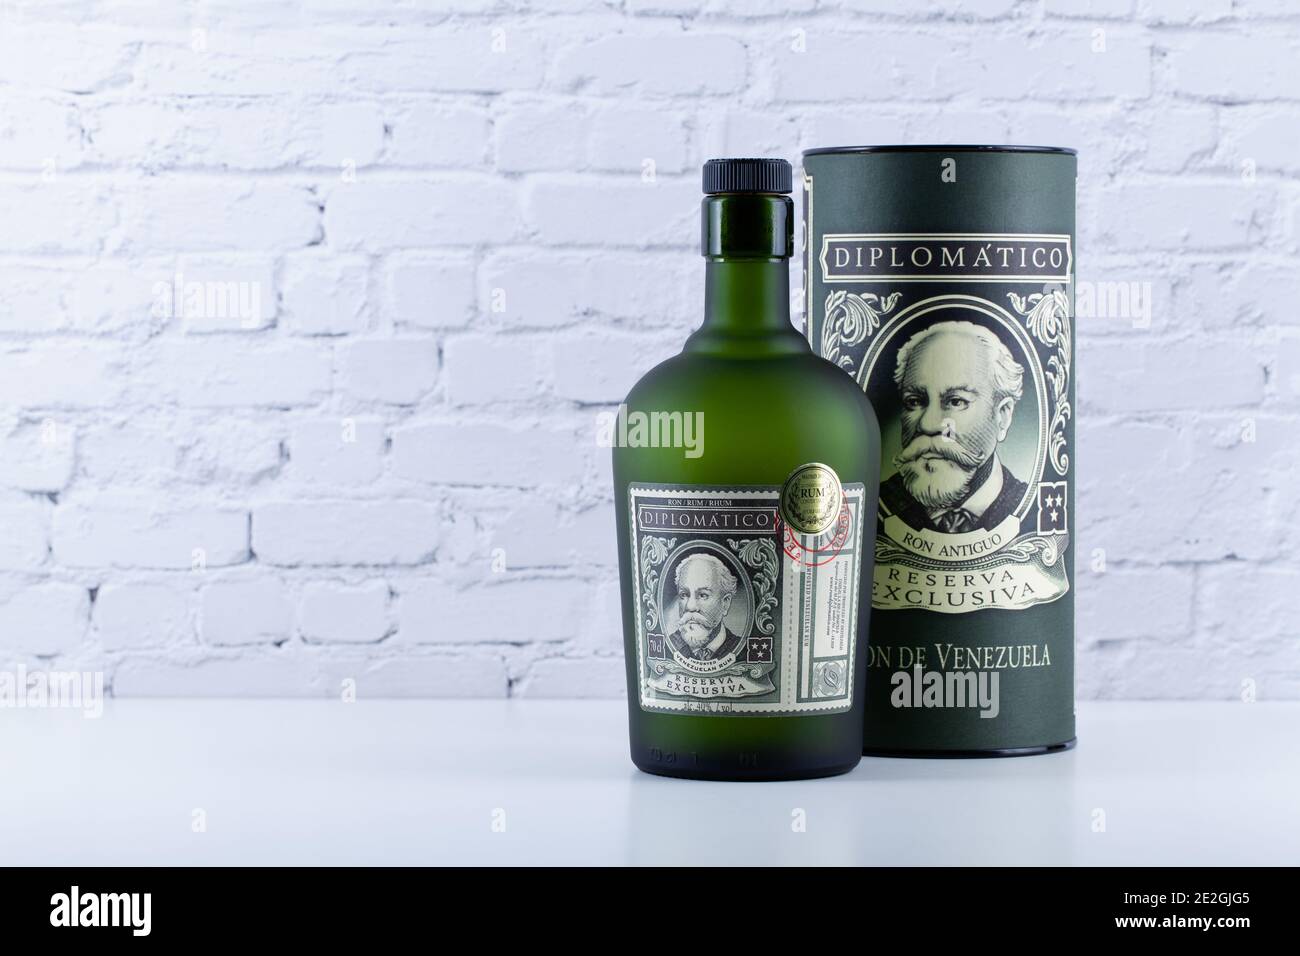 Prague, Czech Republic - 12 January 2021: Bottle of Diplomatico rum in  front of white wall. The history of Diplomatico began in Venezuela in1959  Stock Photo - Alamy